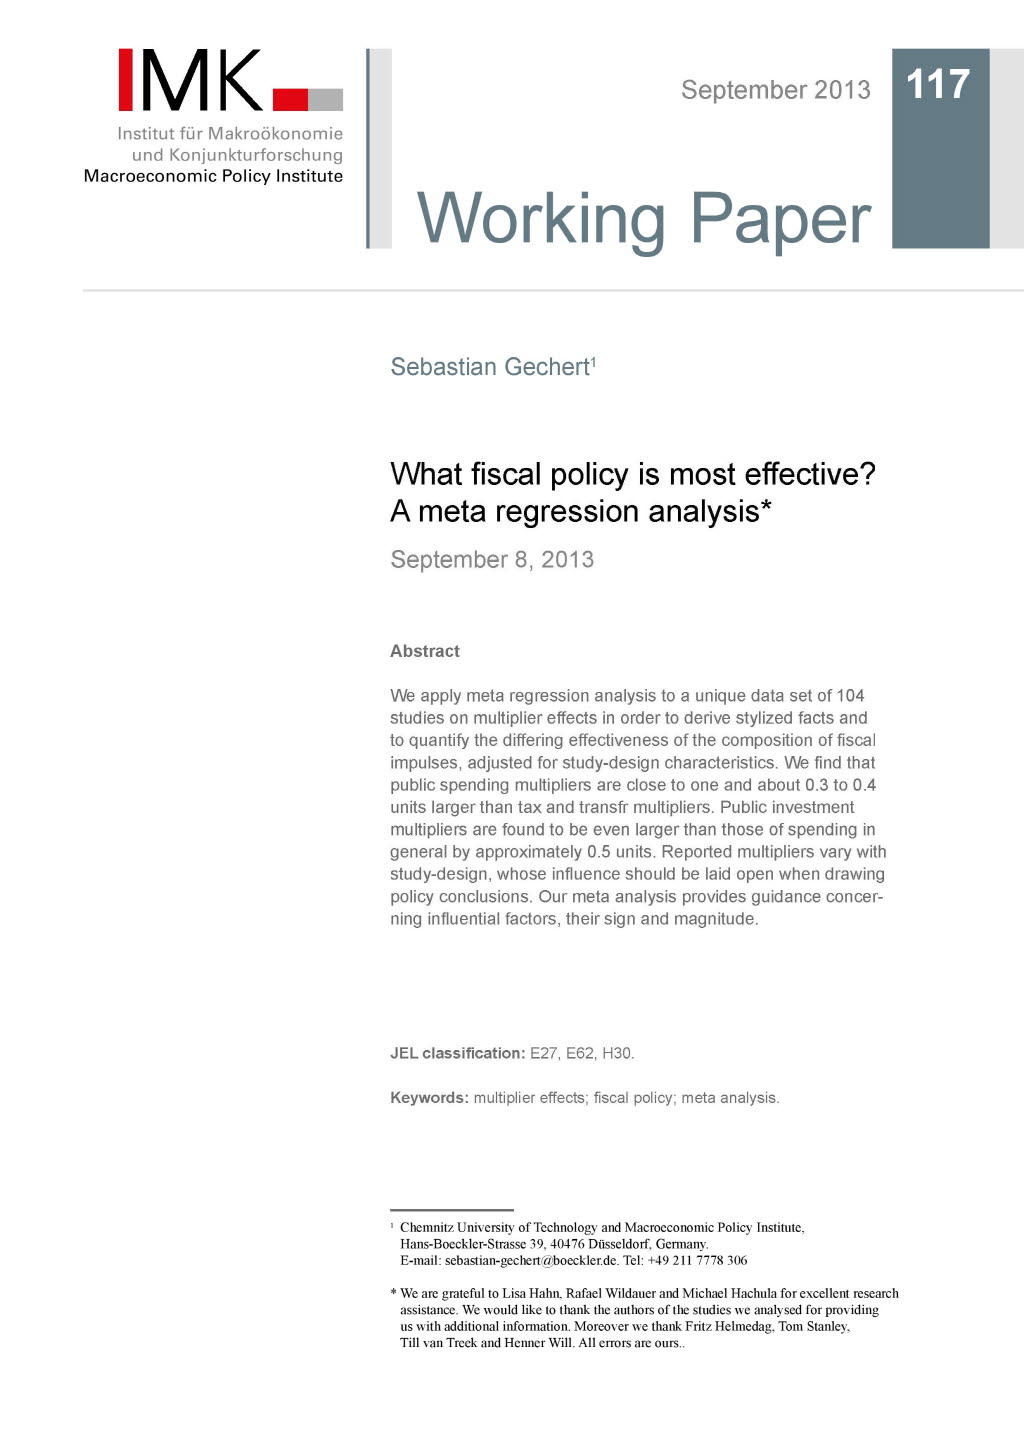 What fiscal policy is most effective?